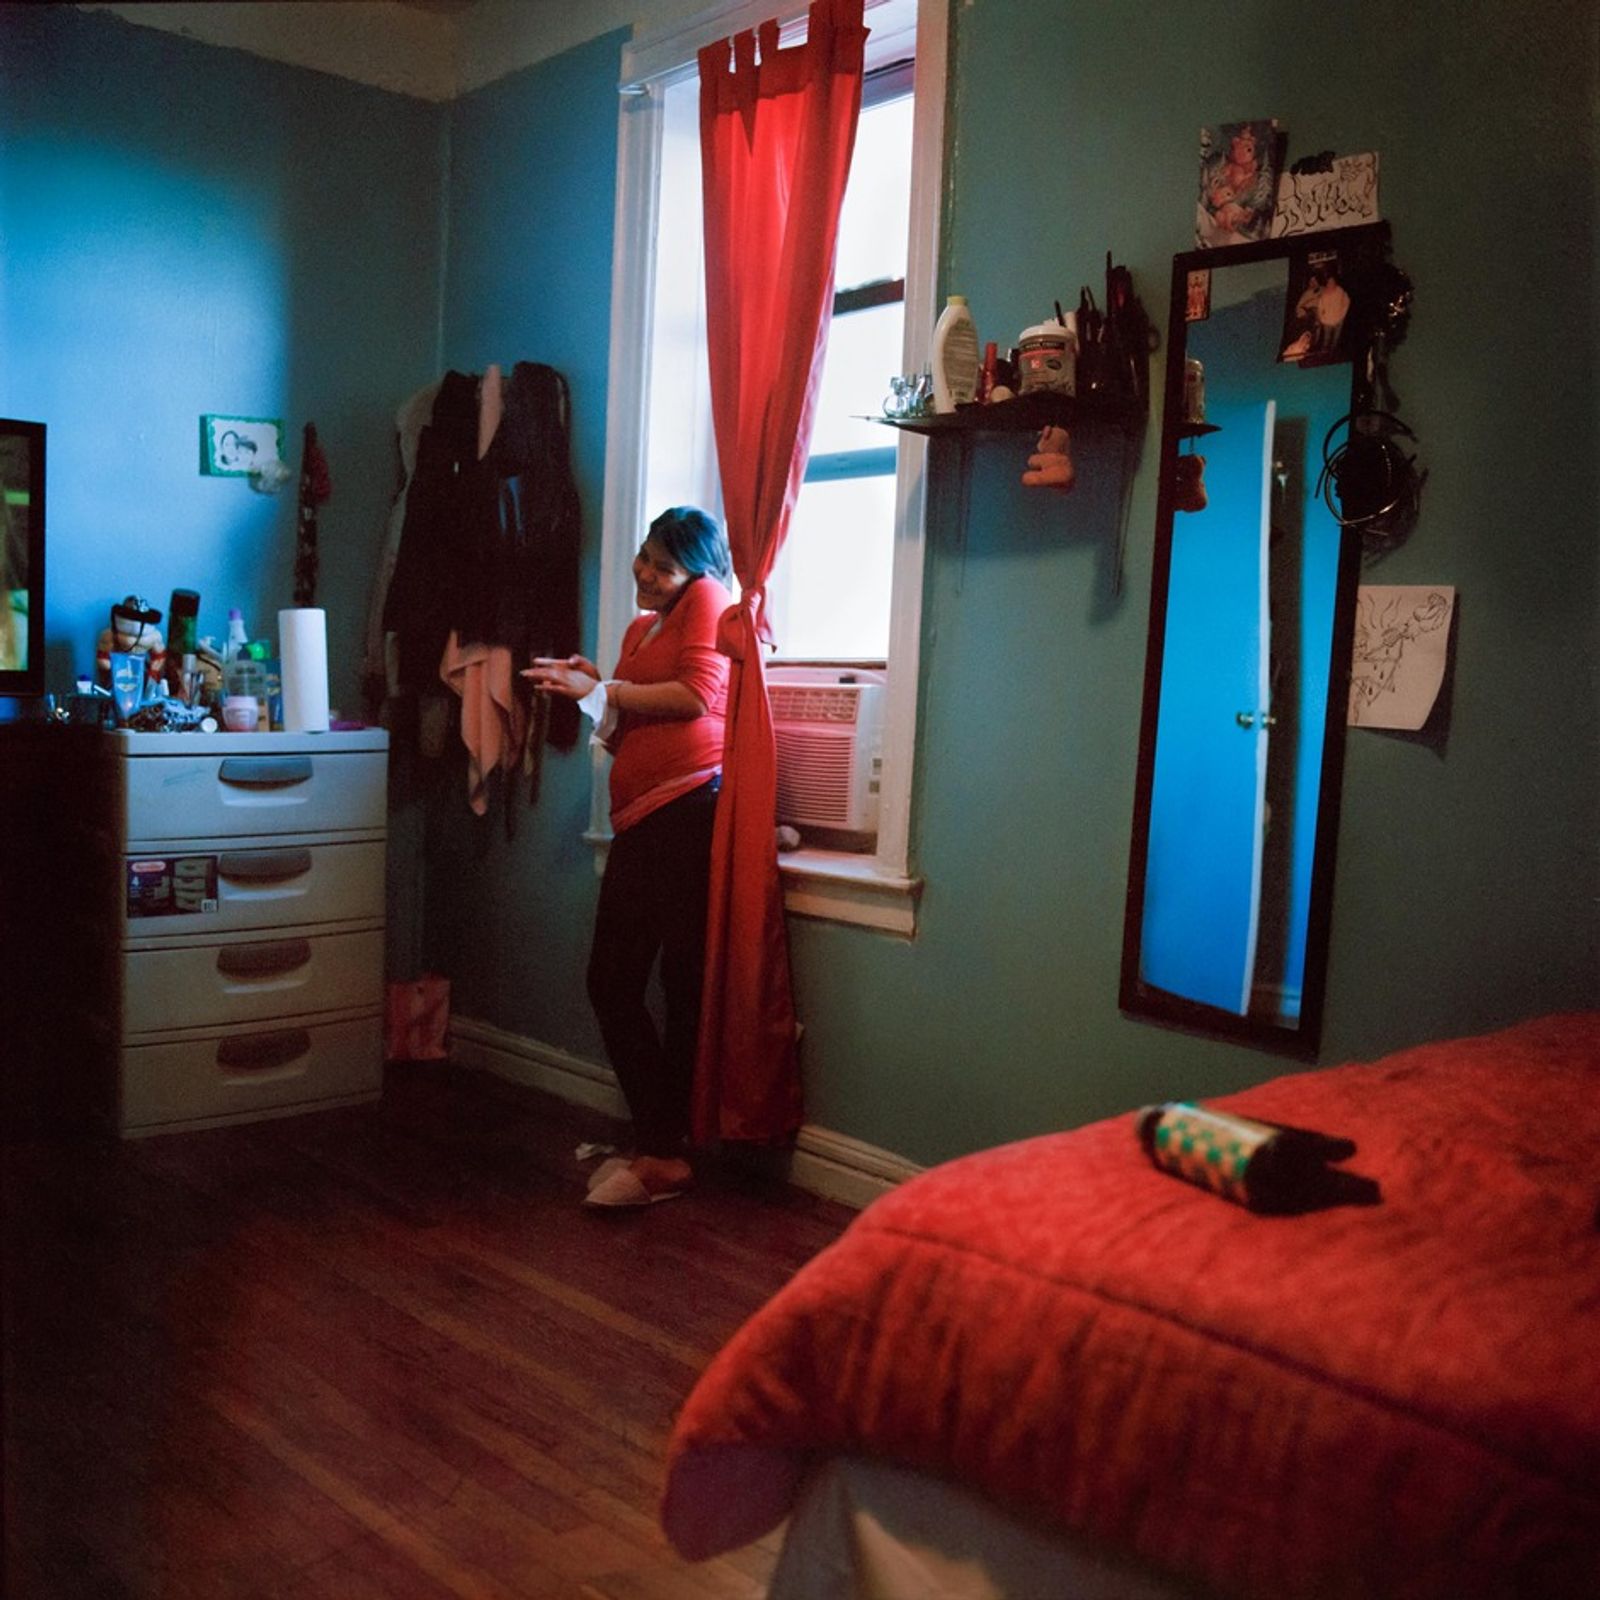 © Ruth Prieto - Image from the Safe Heaven (Blue) photography project